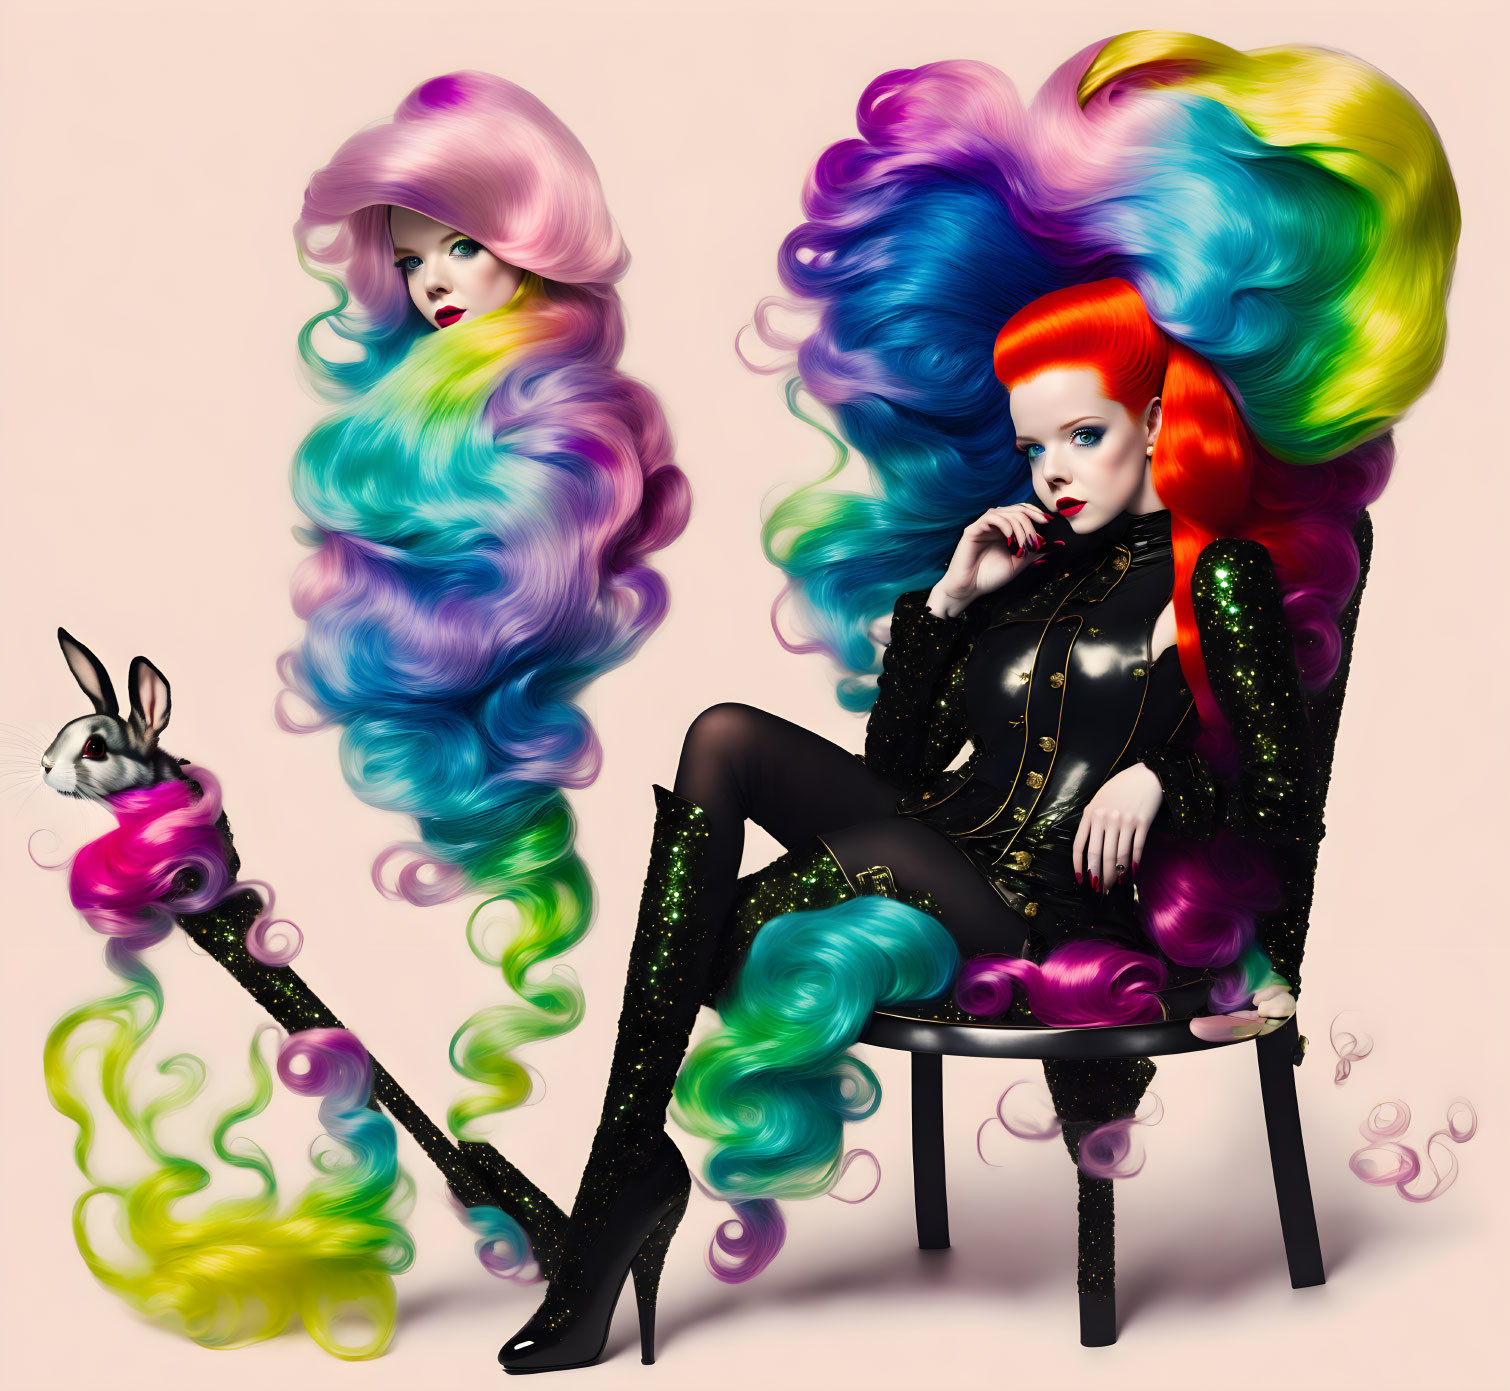 Stylized women with colorful hair and rabbit in fashionable pose